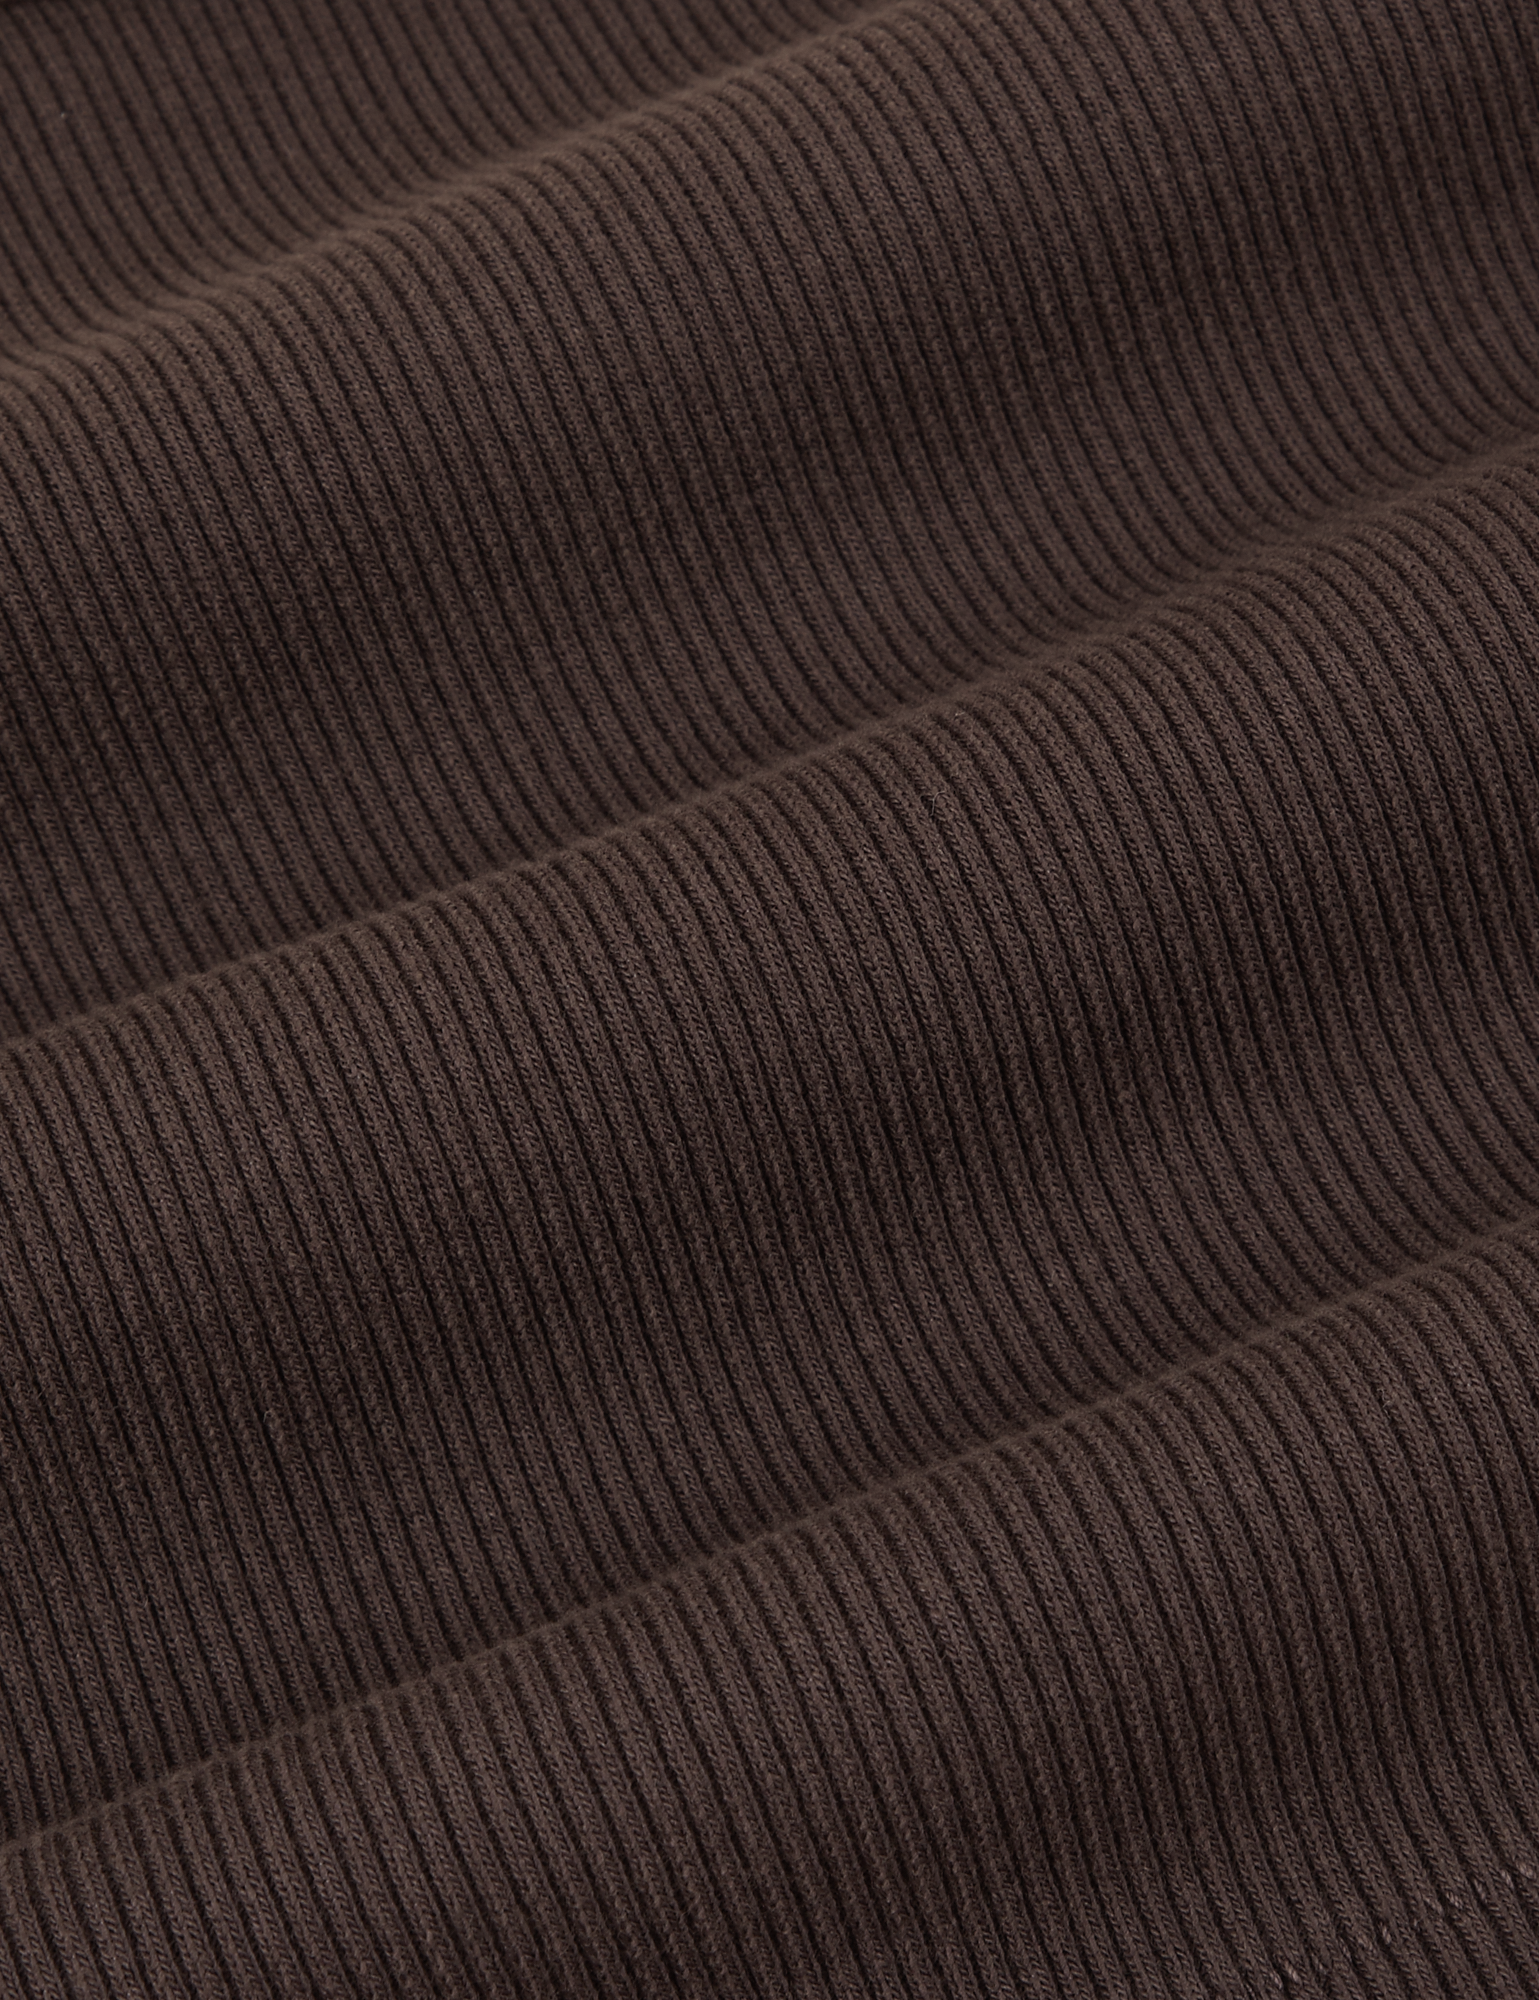 Square Neck Tank in Espresso Brown fabric detail close up